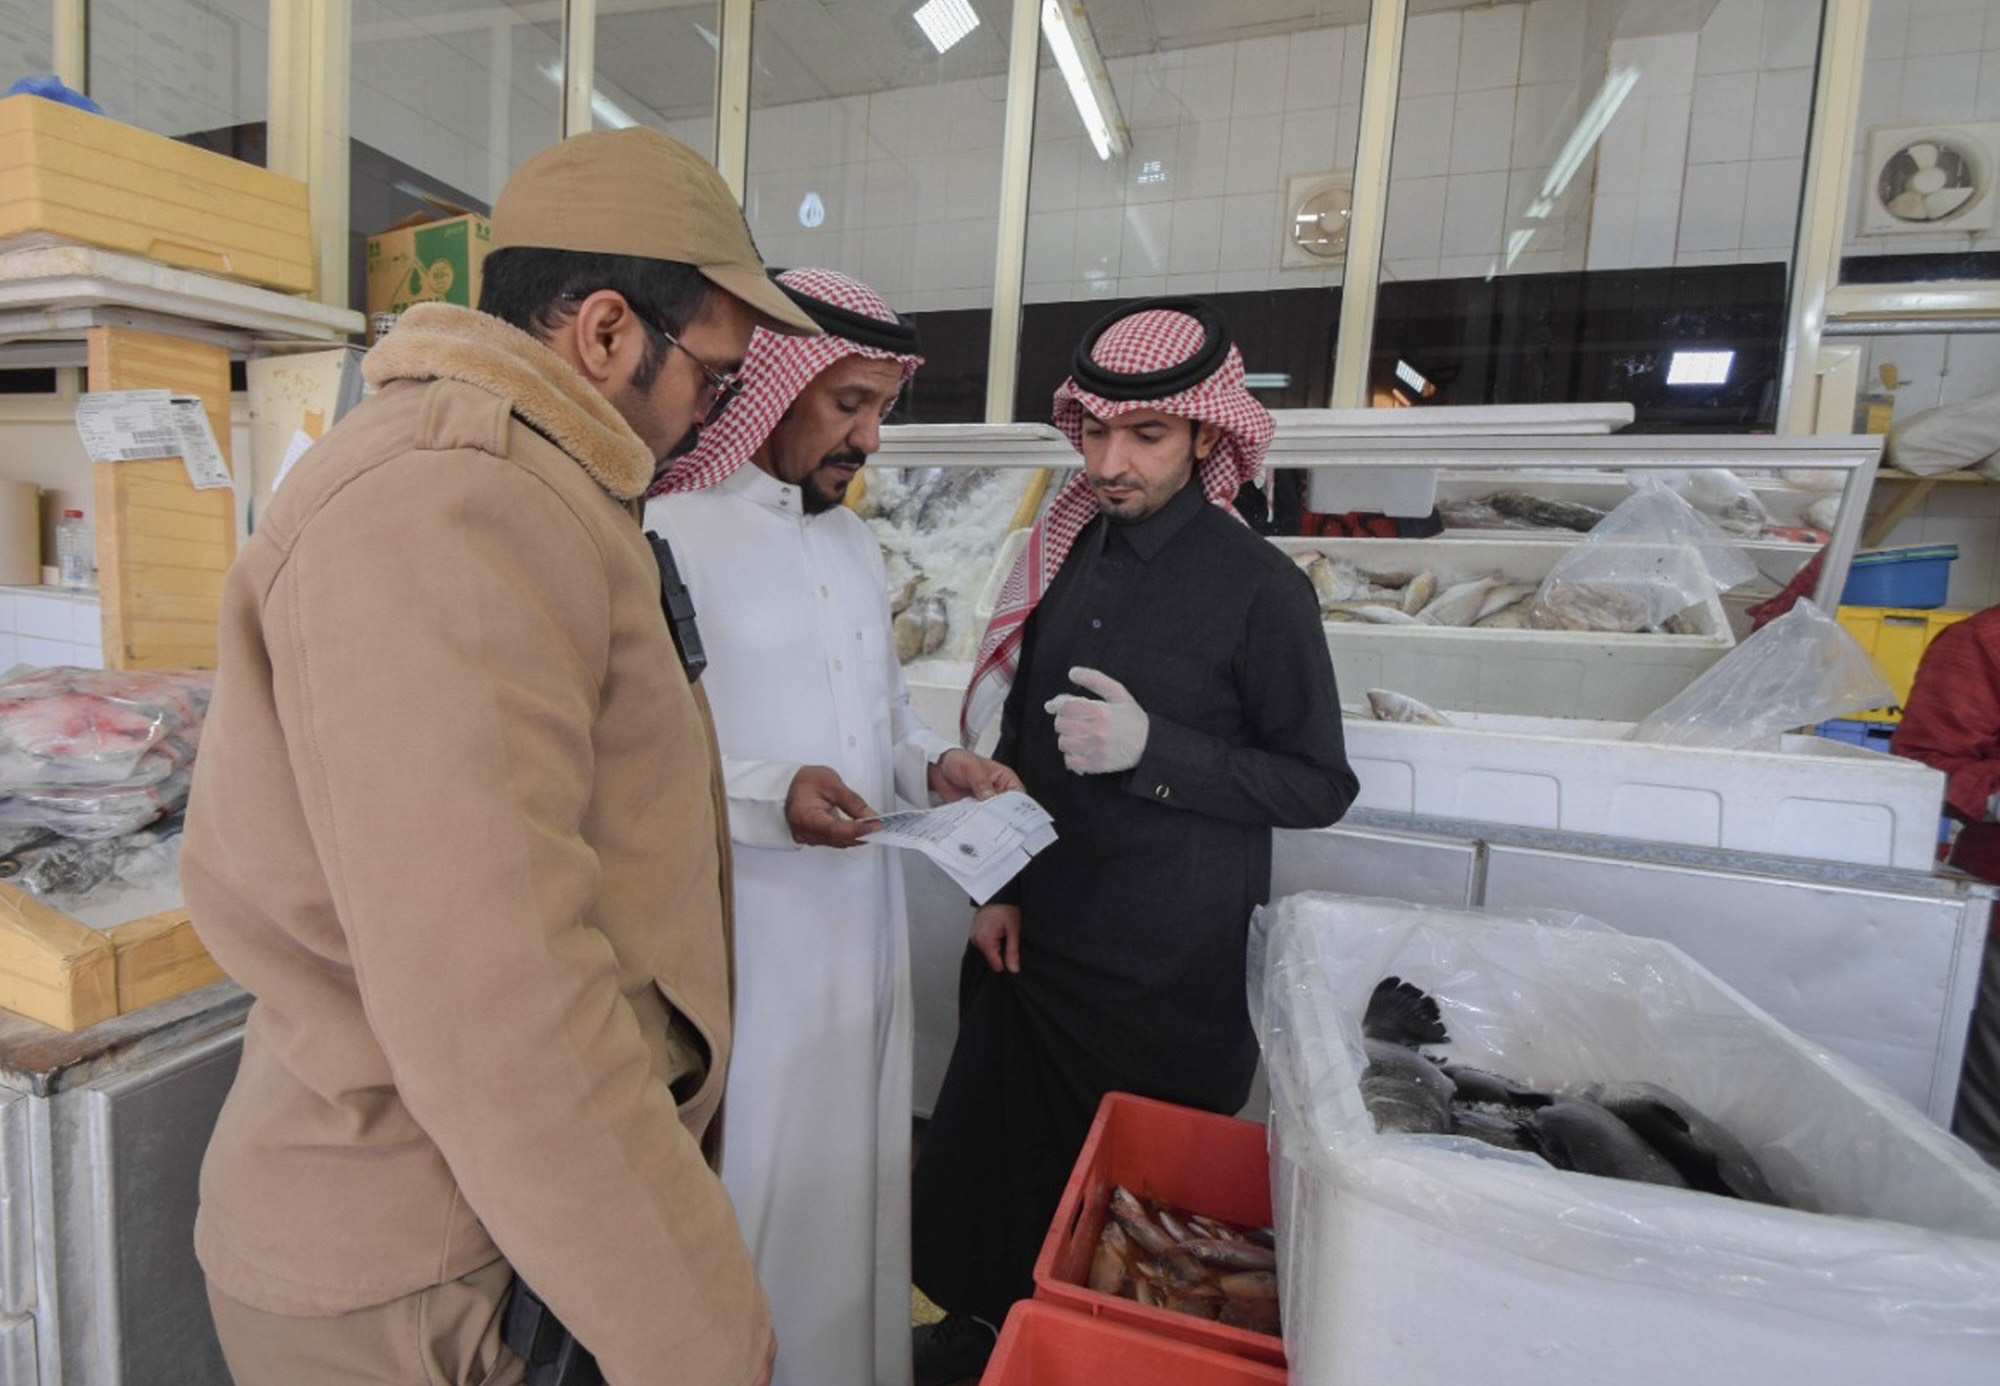 A joint campaign to inspect fish markets in Riyadh